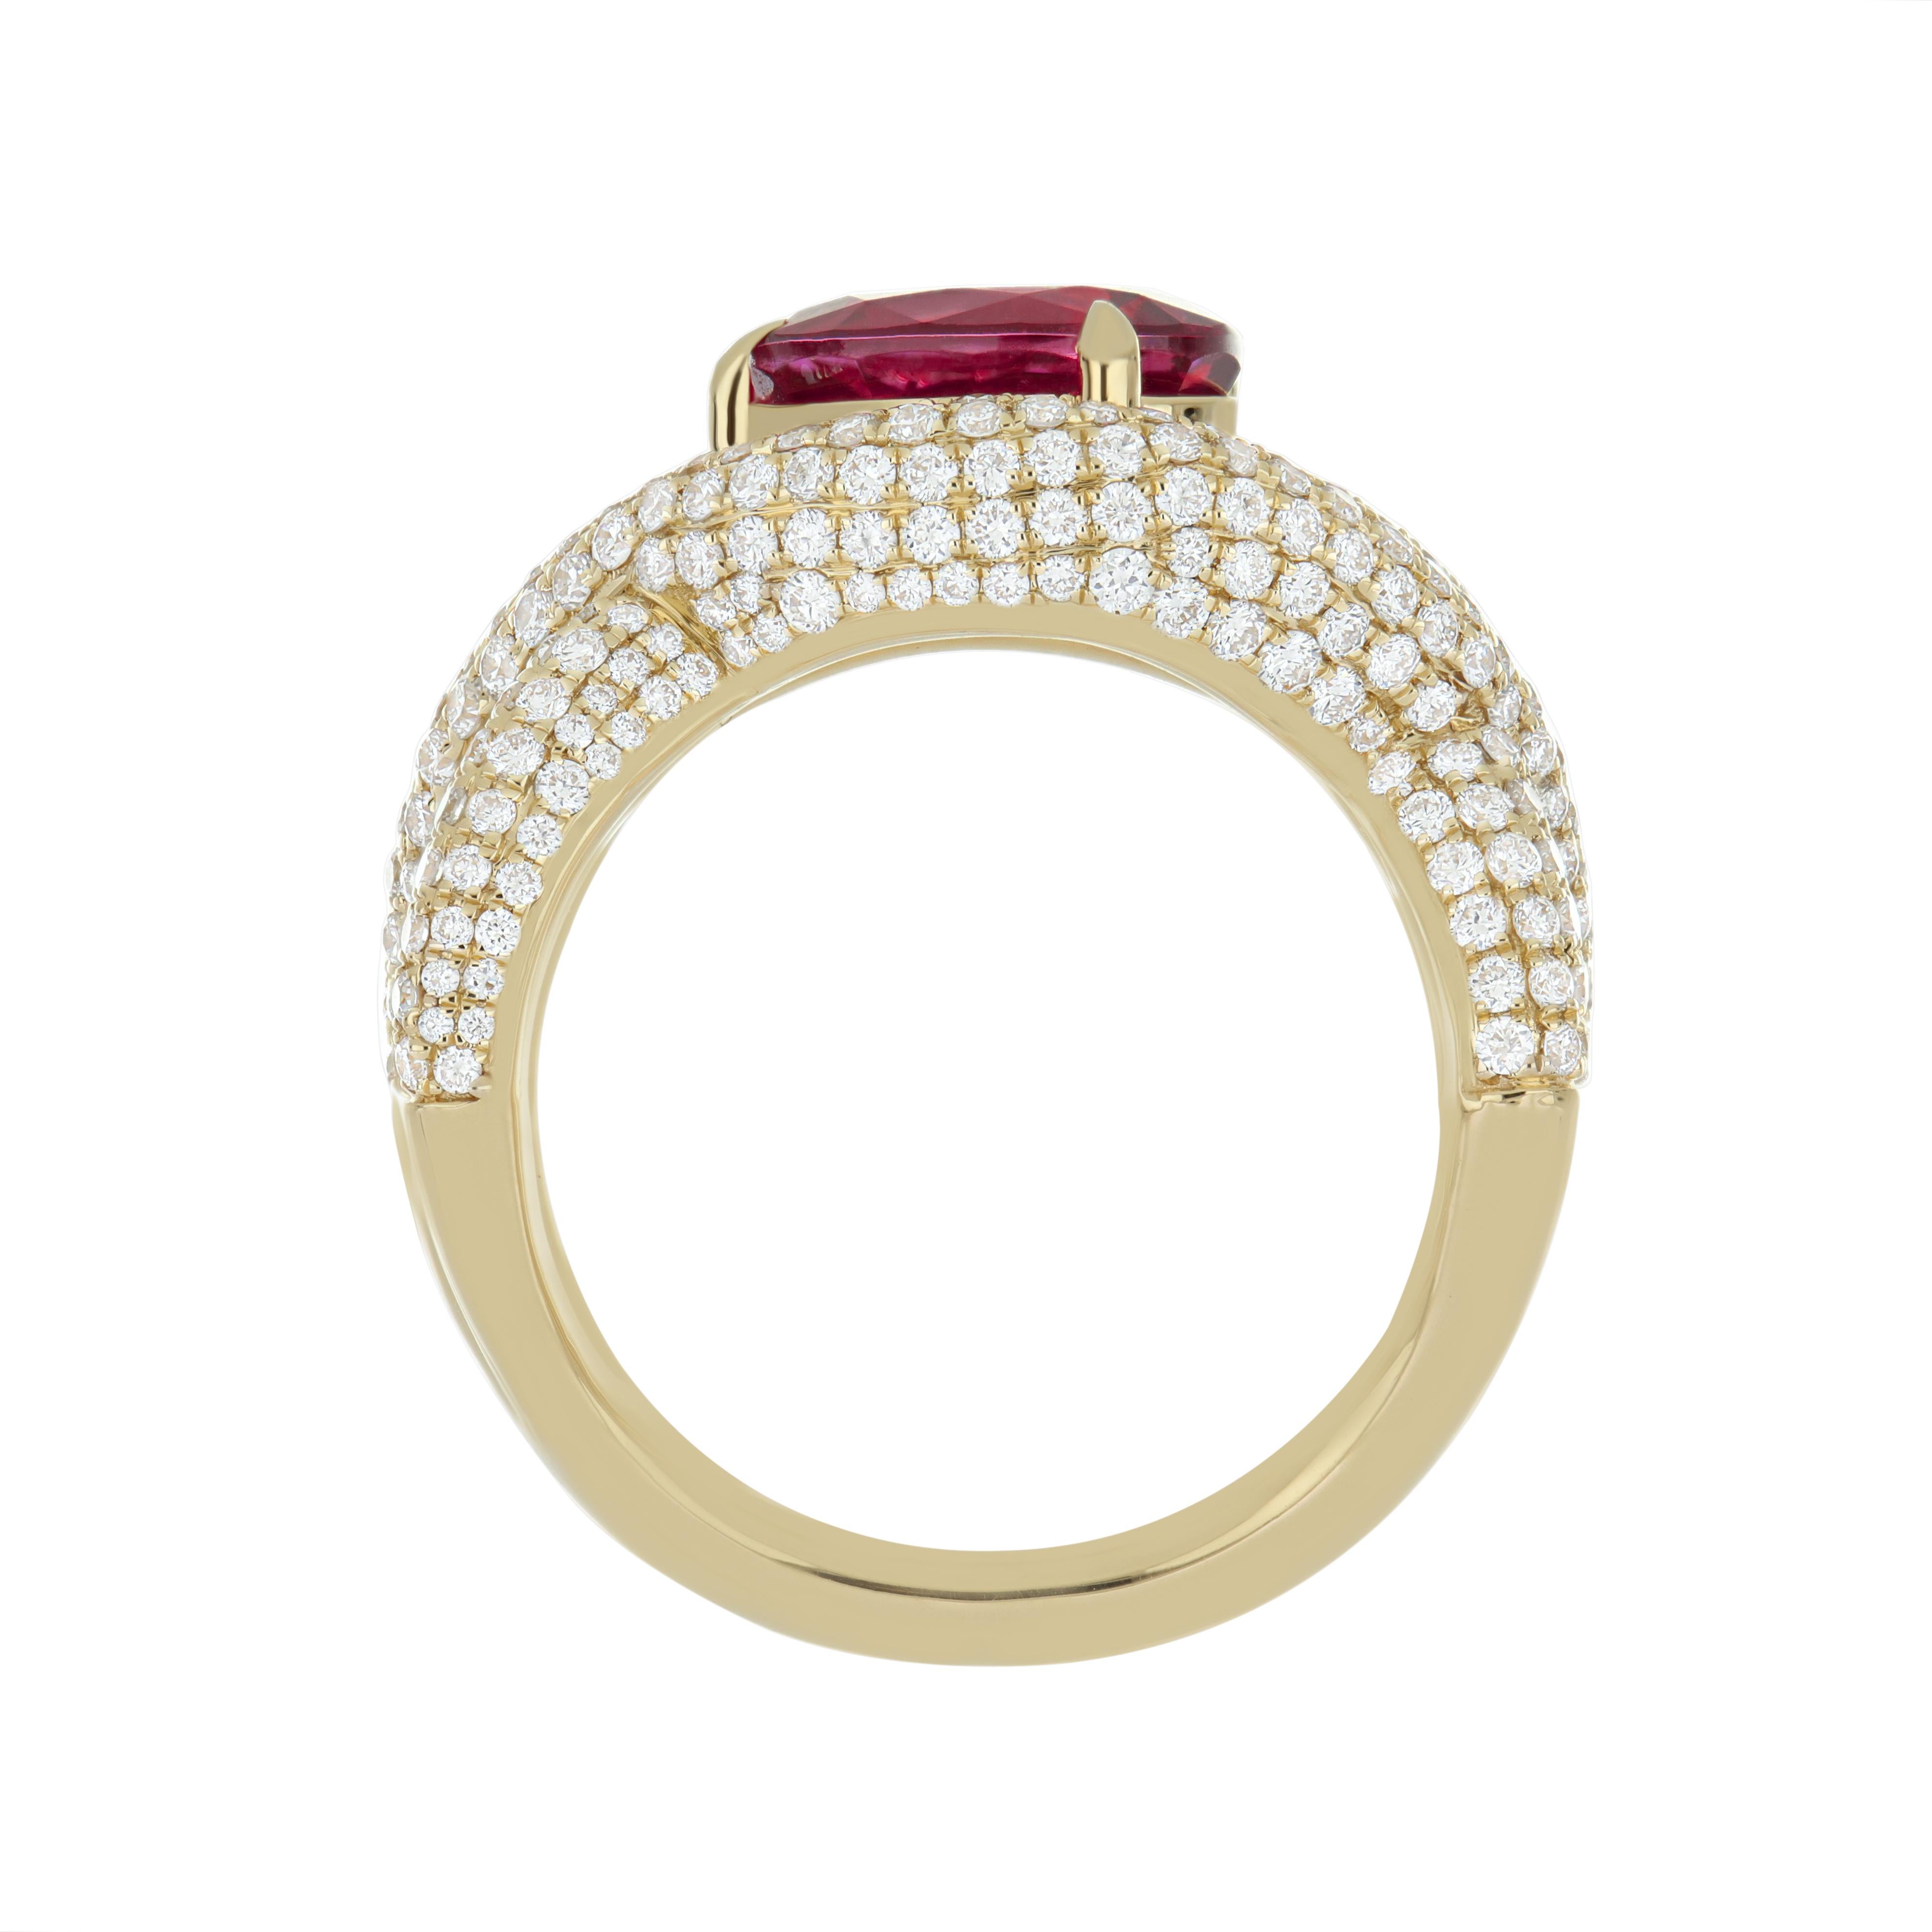 Oval Cut 2.85 CT's Rubellite & Diamond Ring in 18 karat Yellow Gold Hand-crafted Ring For Sale